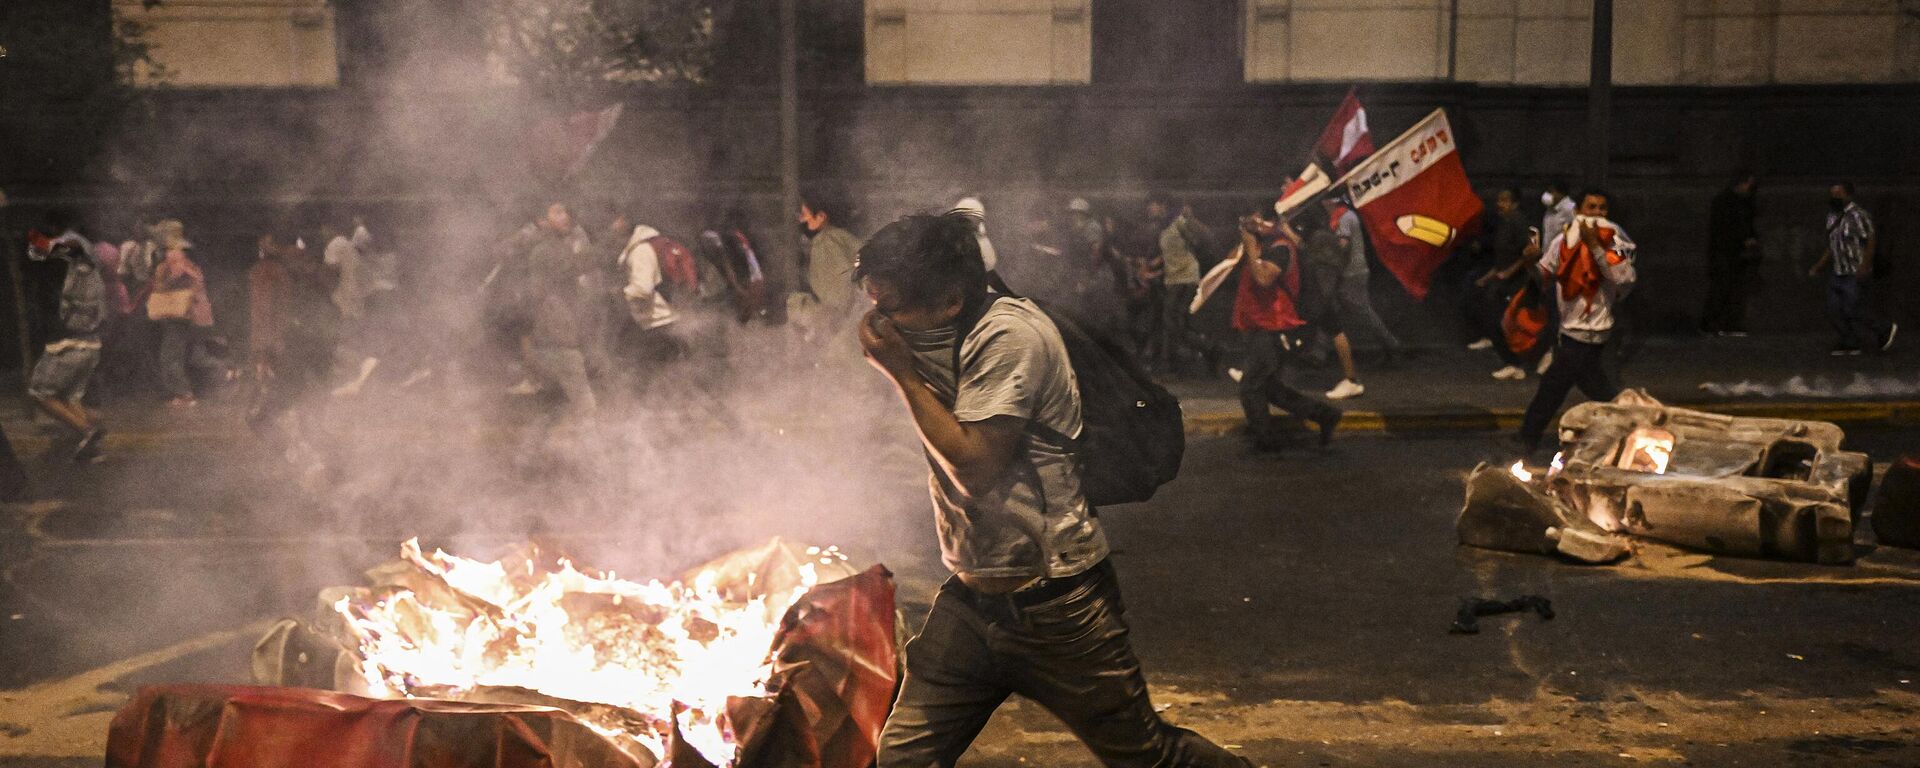 Supporters of former President Pedro Castillo clash with riot police during a demonstration demanding his release and the closure of the Peruvian Congress in Lima, on December 11, 2022.  - Sputnik International, 1920, 27.12.2022